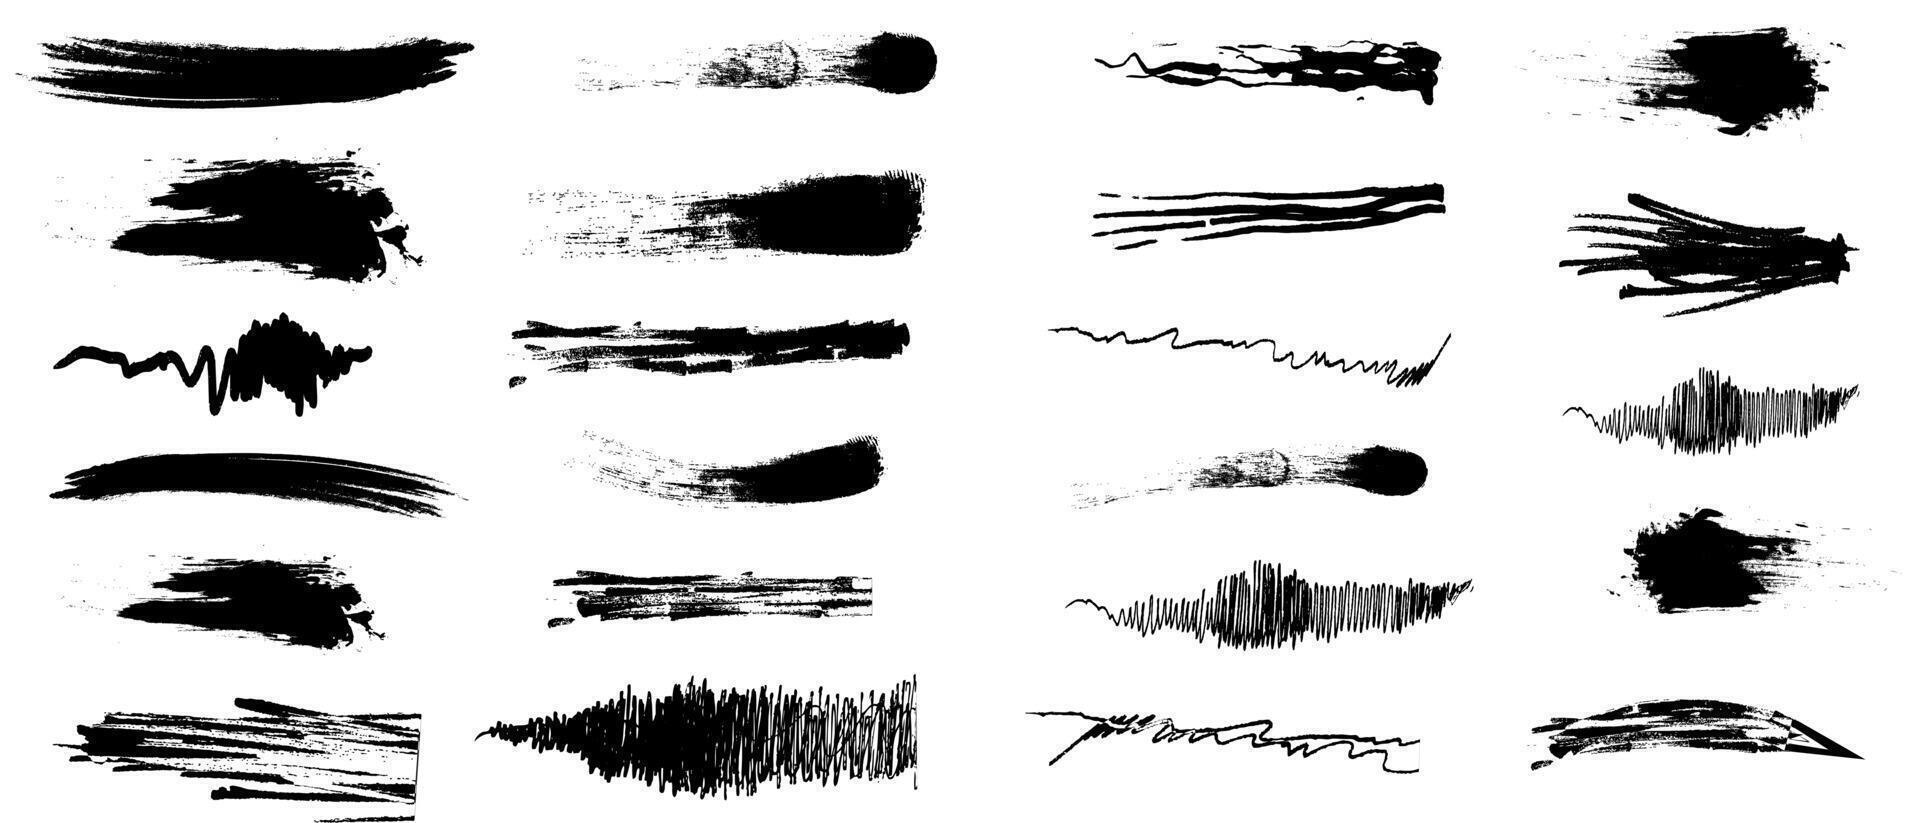 Set of black grunge brushes. Paint brushes and ink brushes, messy background set of flat vector illustrations, collection of the best paint brushes.